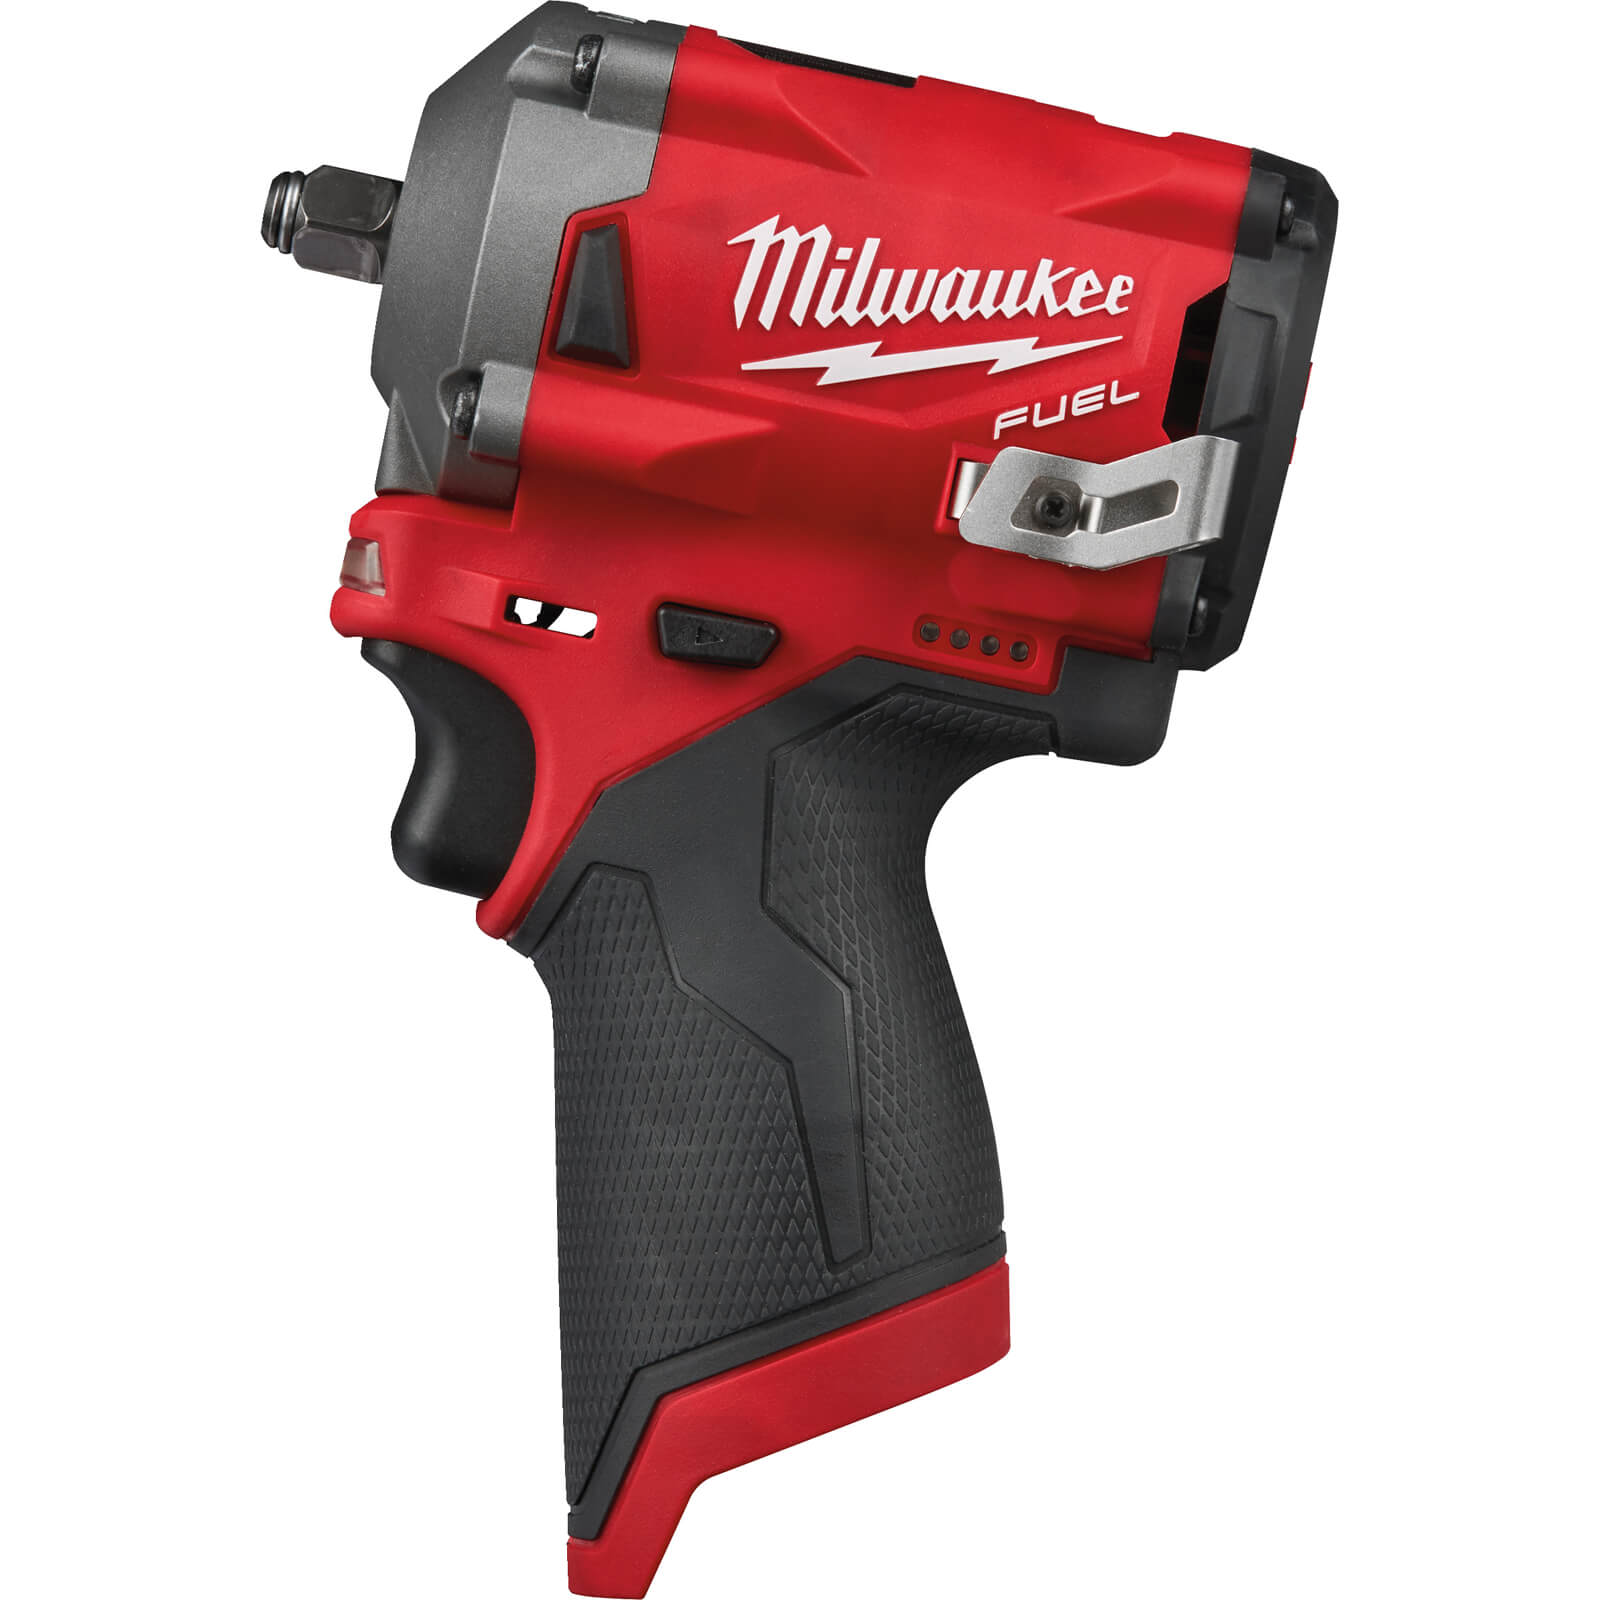 Image of Milwaukee M12 FIW38 Fuel 12v Cordless Brushless 3/8" Drive Impact Wrench No Batteries No Charger No Case